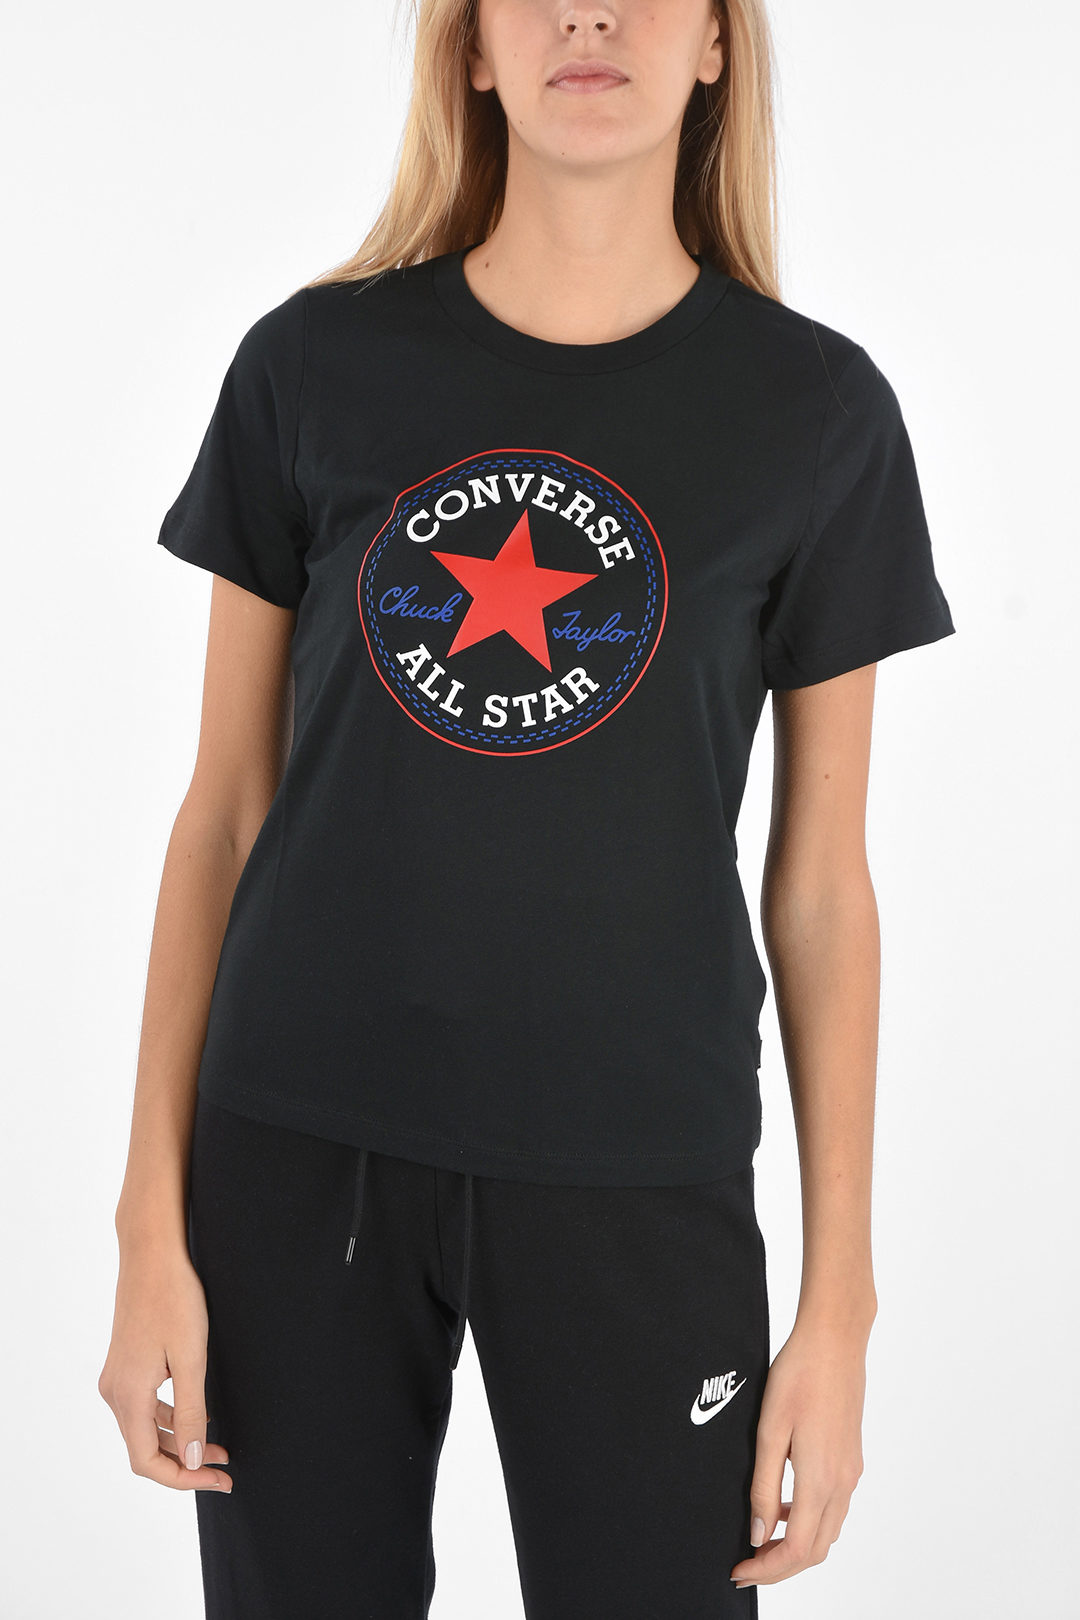 Converse ALL STAR Printed T-shirt women - Glamood Outlet